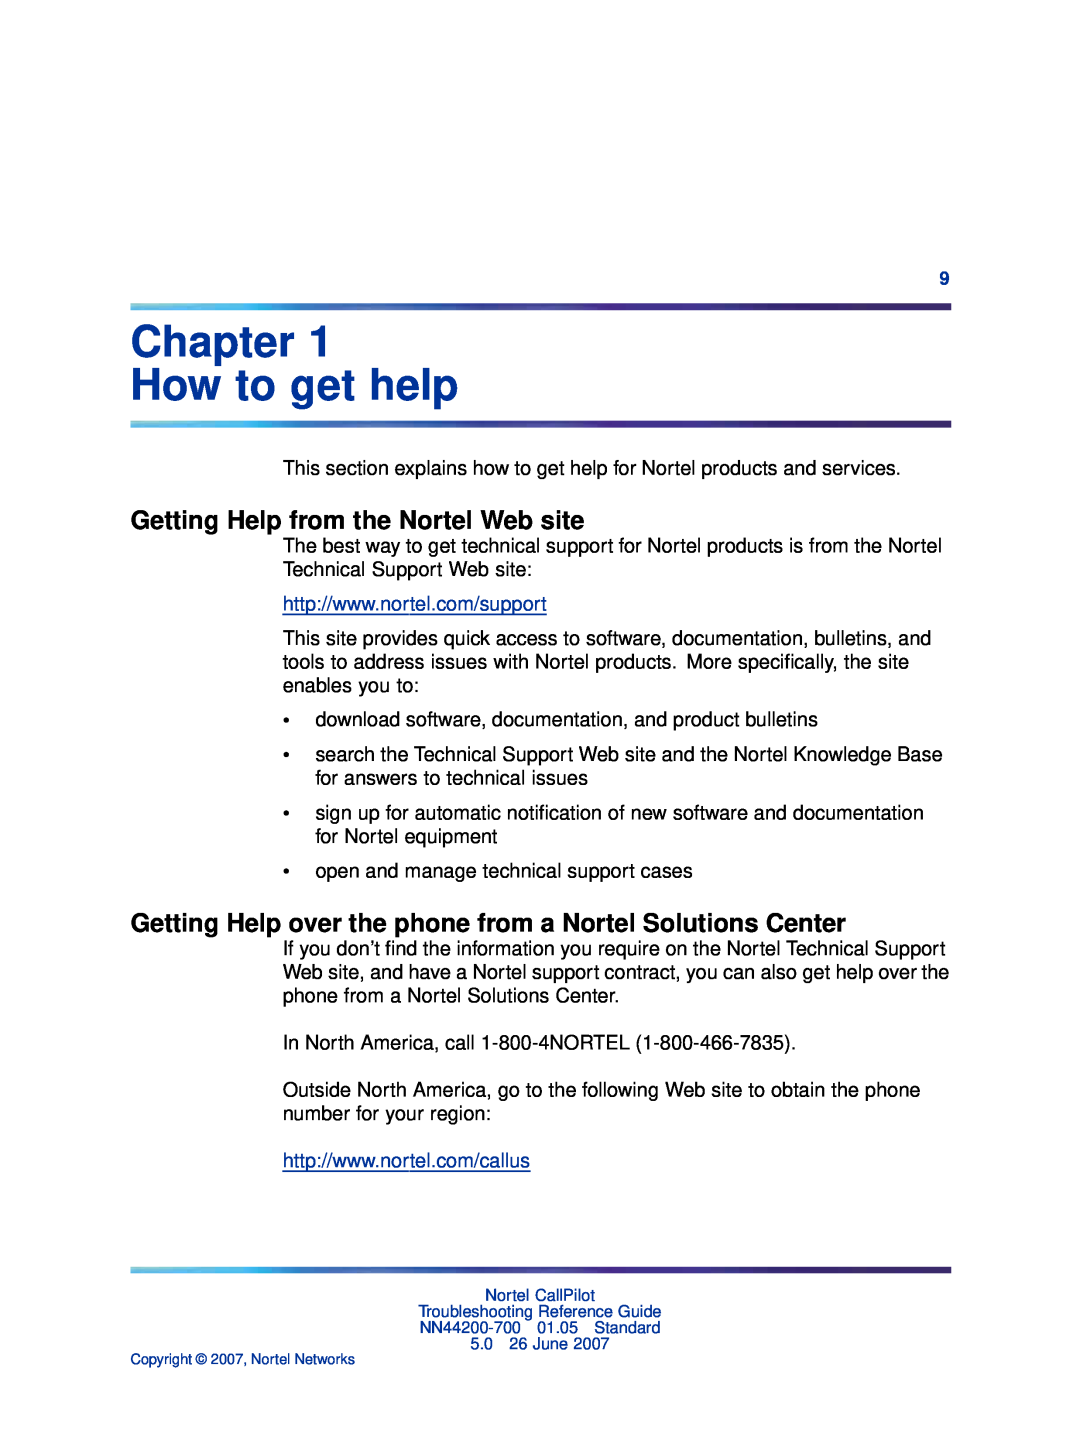 Nortel Networks NN44200-700 manual Chapter How to get help, Getting Help from the Nortel Web site 